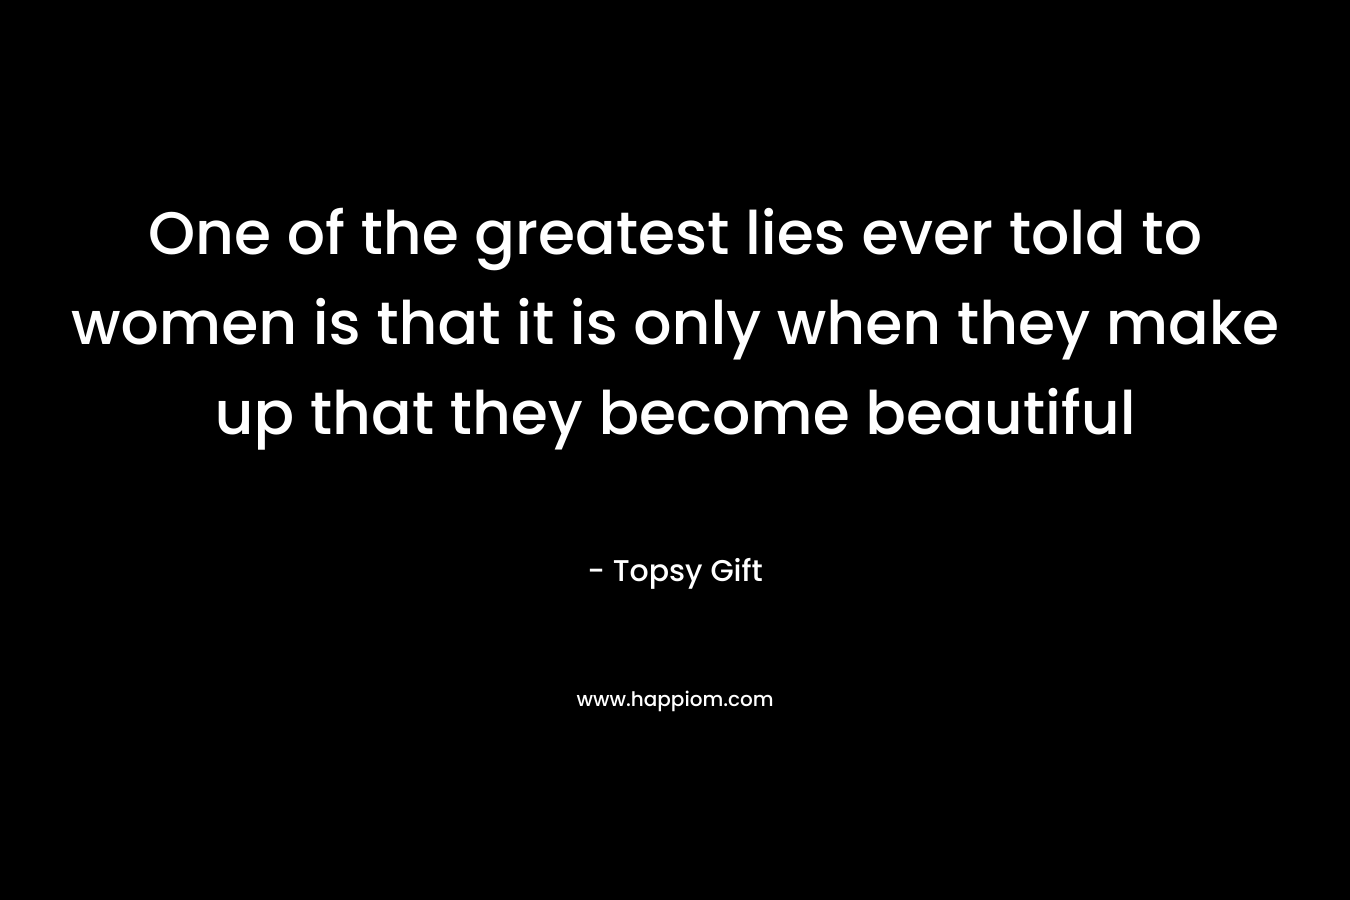 One of the greatest lies ever told to women is that it is only when they make up that they become beautiful – Topsy Gift